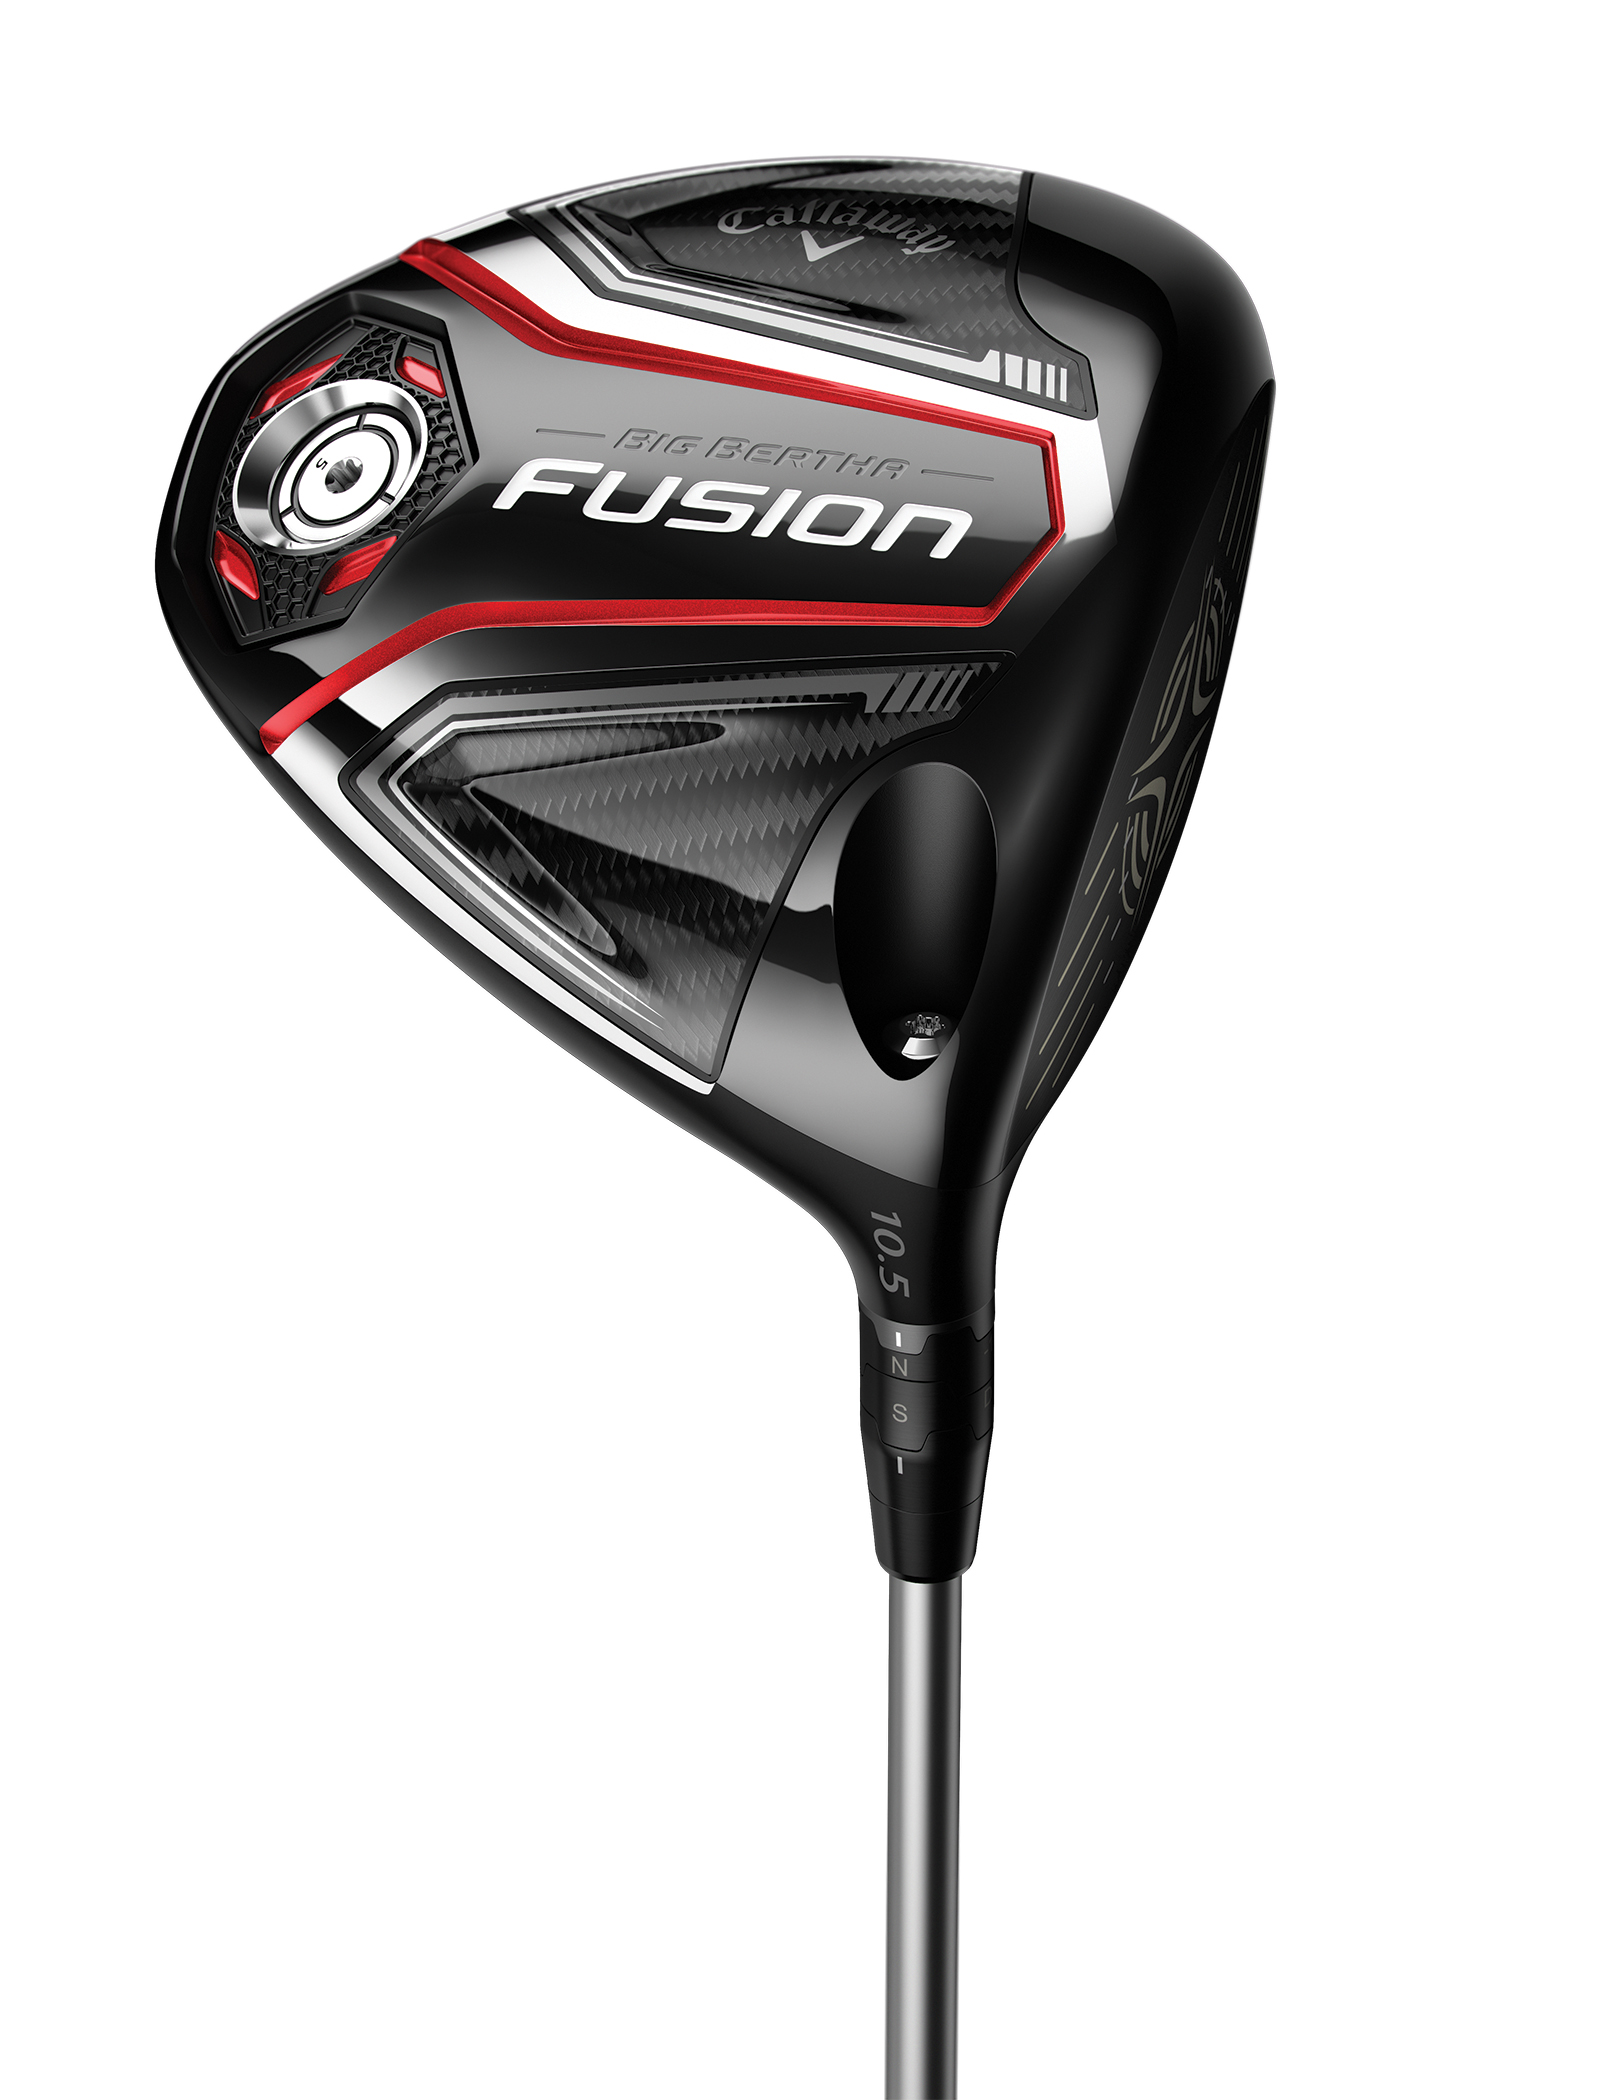 Callaway's Big Bertha Fusion goes all in on forgiveness | This is